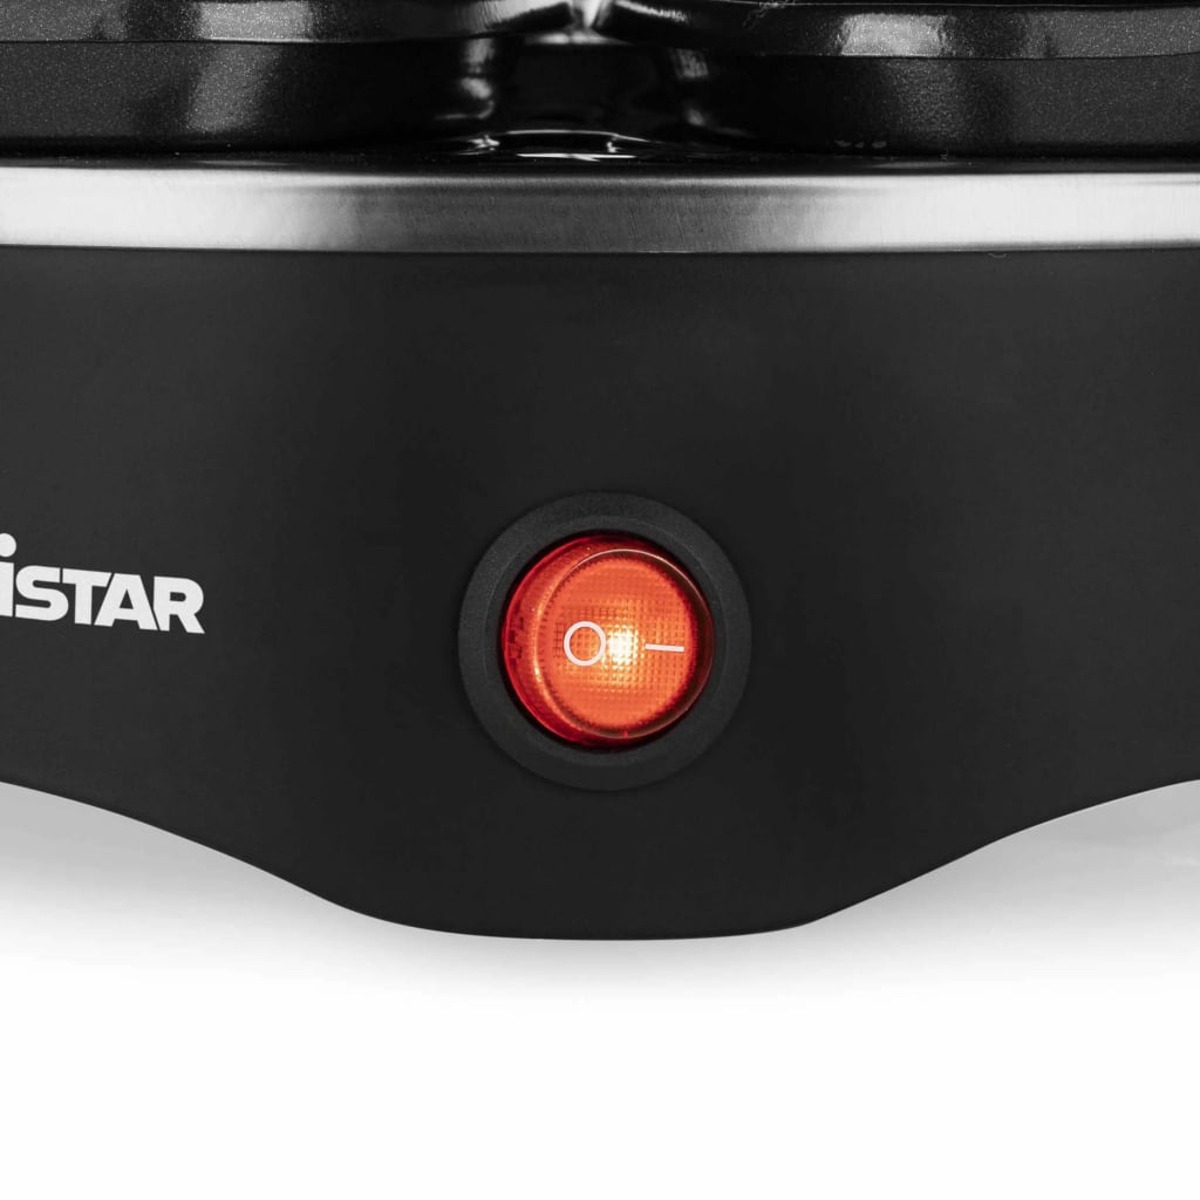 2in1 TRISTAR Raclette